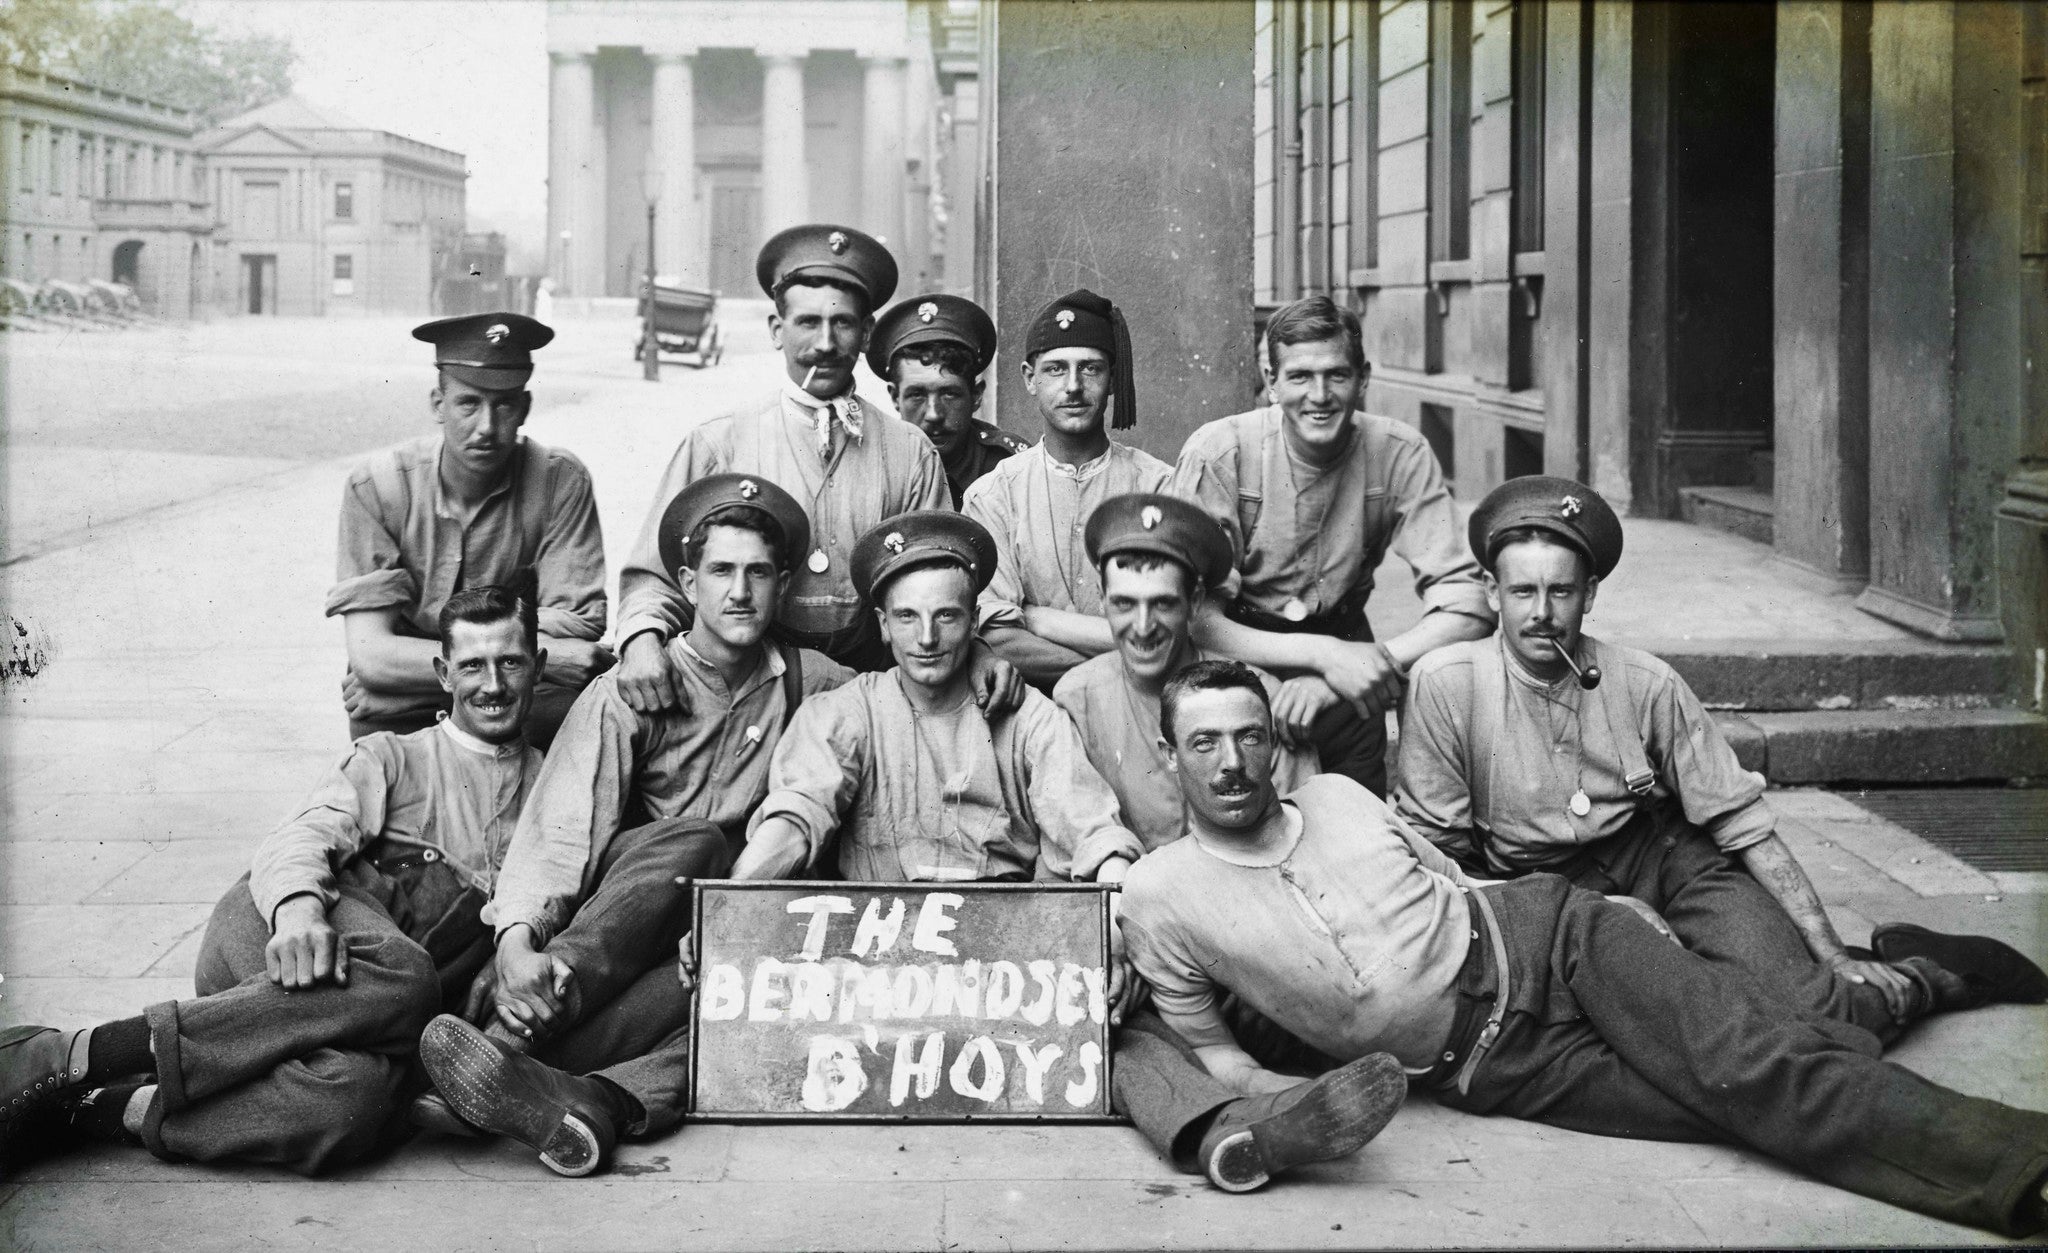 Bermondsey Bhoys from the 2nd Grenadier Guards inside their base at Wellington Barracks in either 1914 or 1915 (c) Museum of London